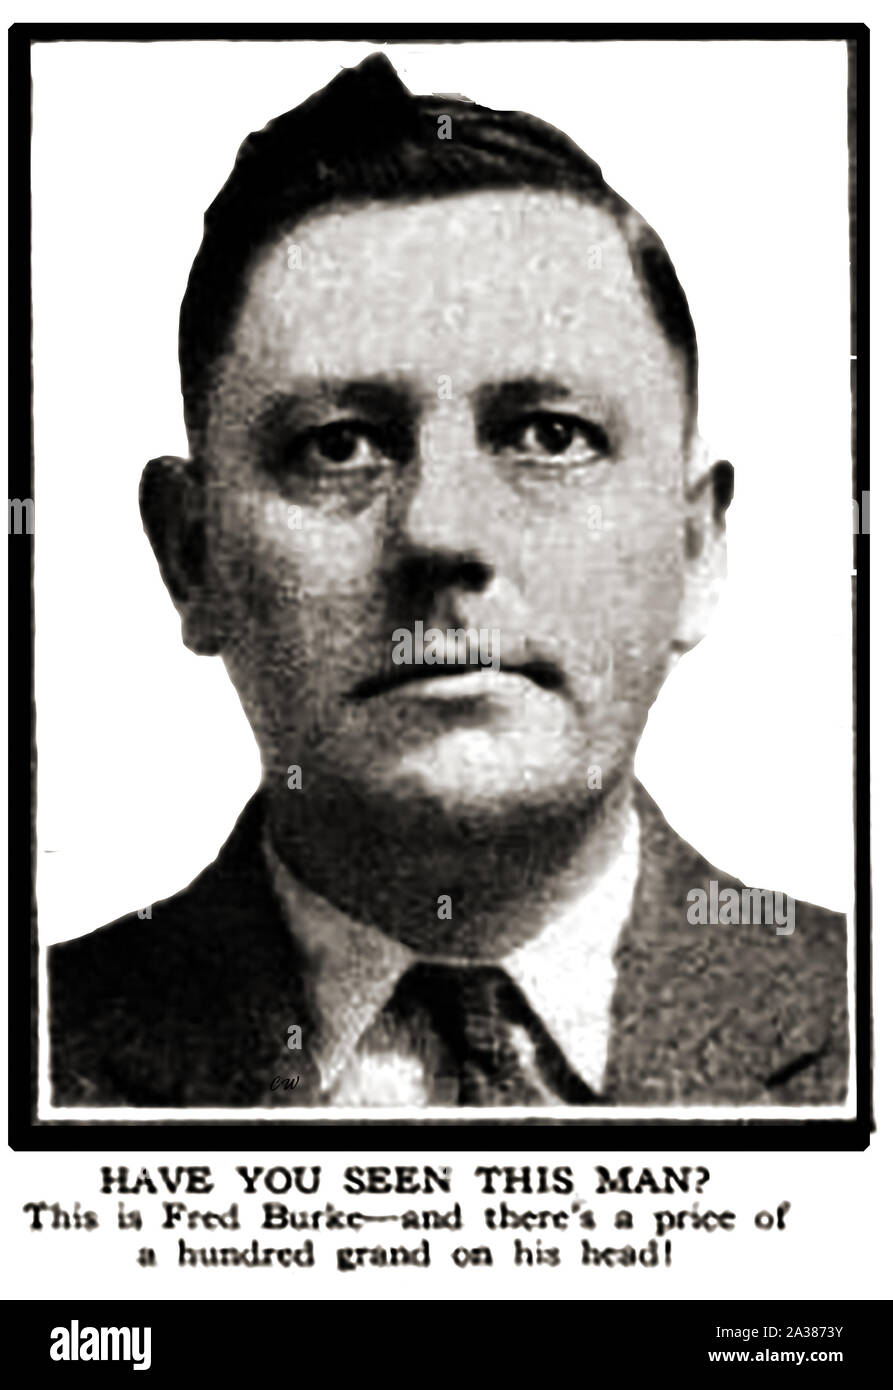 1930 periodical illustration - Law & Order in the USA -1930 newspaper mugshot of Chicago Gangster, contract killer, armed robber  and hit man Fred  'Killer' Burke (1893-1940)  His real name was Thomas A Camp. When this photo appeared he was wanted in connection with St Valentine's Day Massacre. Stock Photo